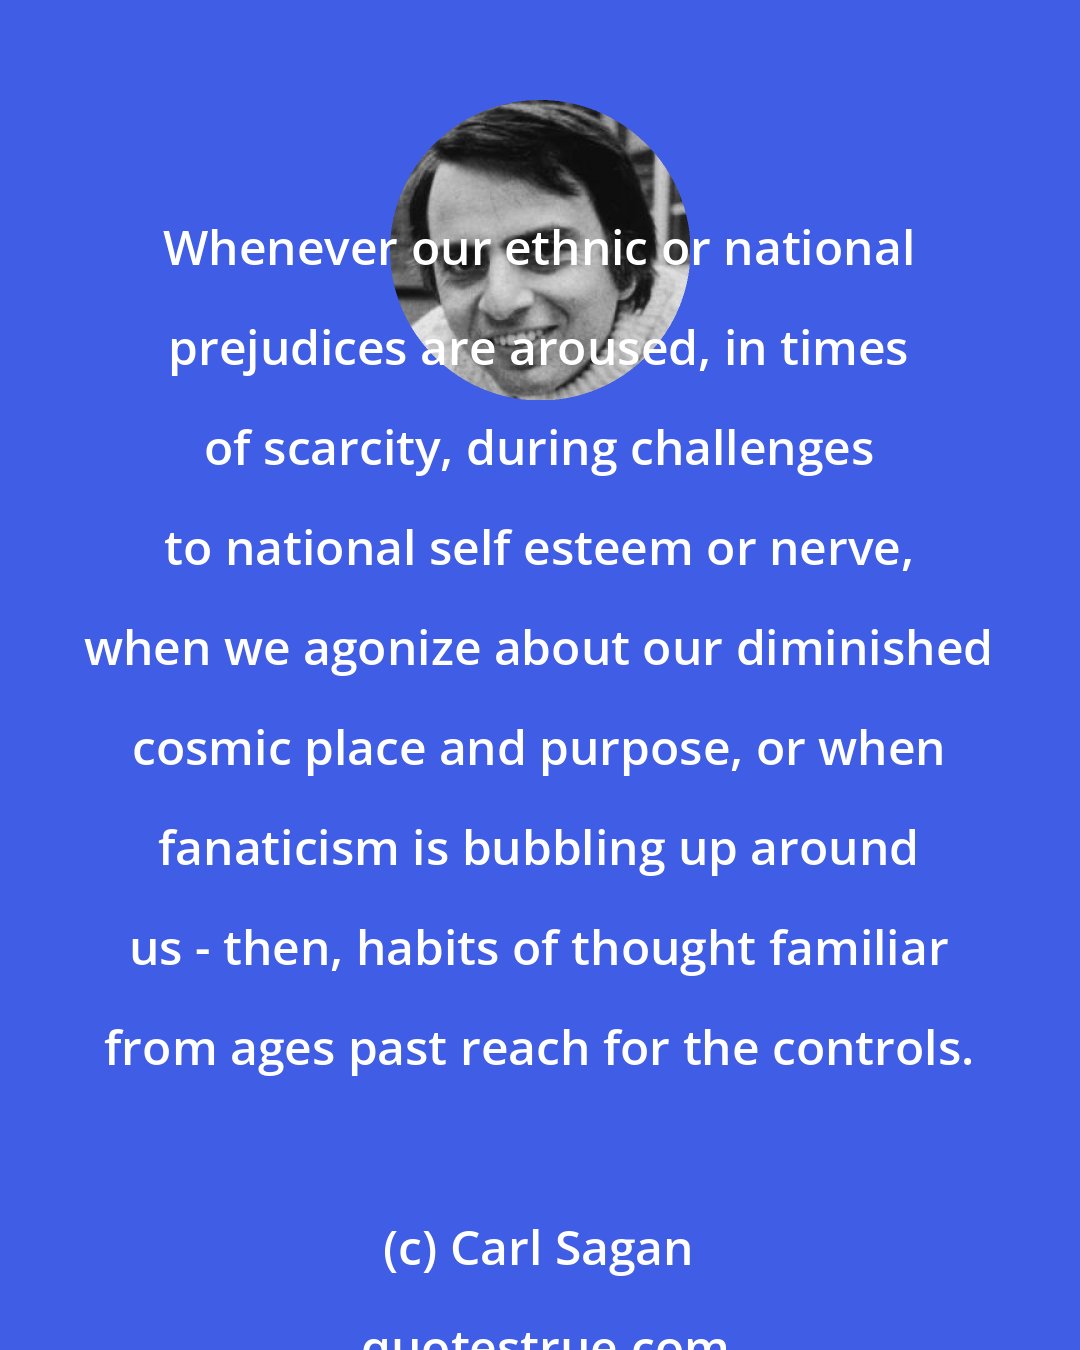 Carl Sagan: Whenever our ethnic or national prejudices are aroused, in times of scarcity, during challenges to national self esteem or nerve, when we agonize about our diminished cosmic place and purpose, or when fanaticism is bubbling up around us - then, habits of thought familiar from ages past reach for the controls.